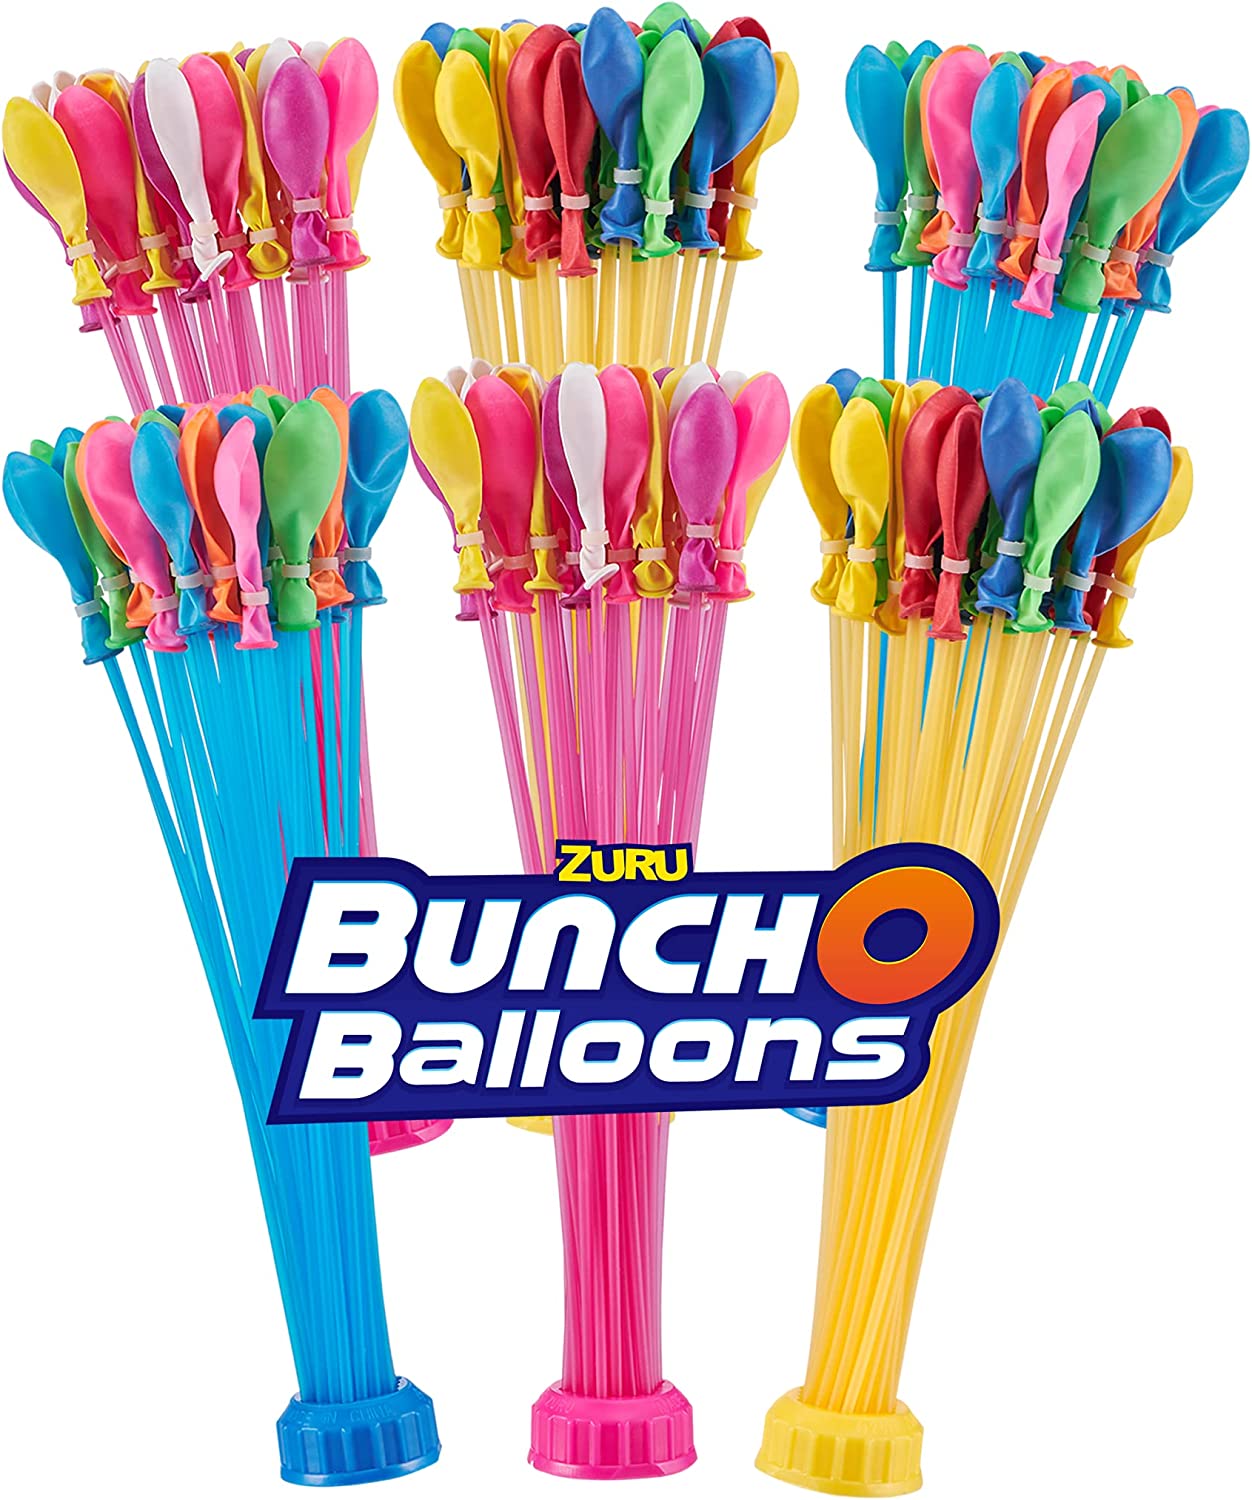 Bunch O Balloons 3pk Rapid-Filling Self-Sealing Tropical Colored Water Balloons